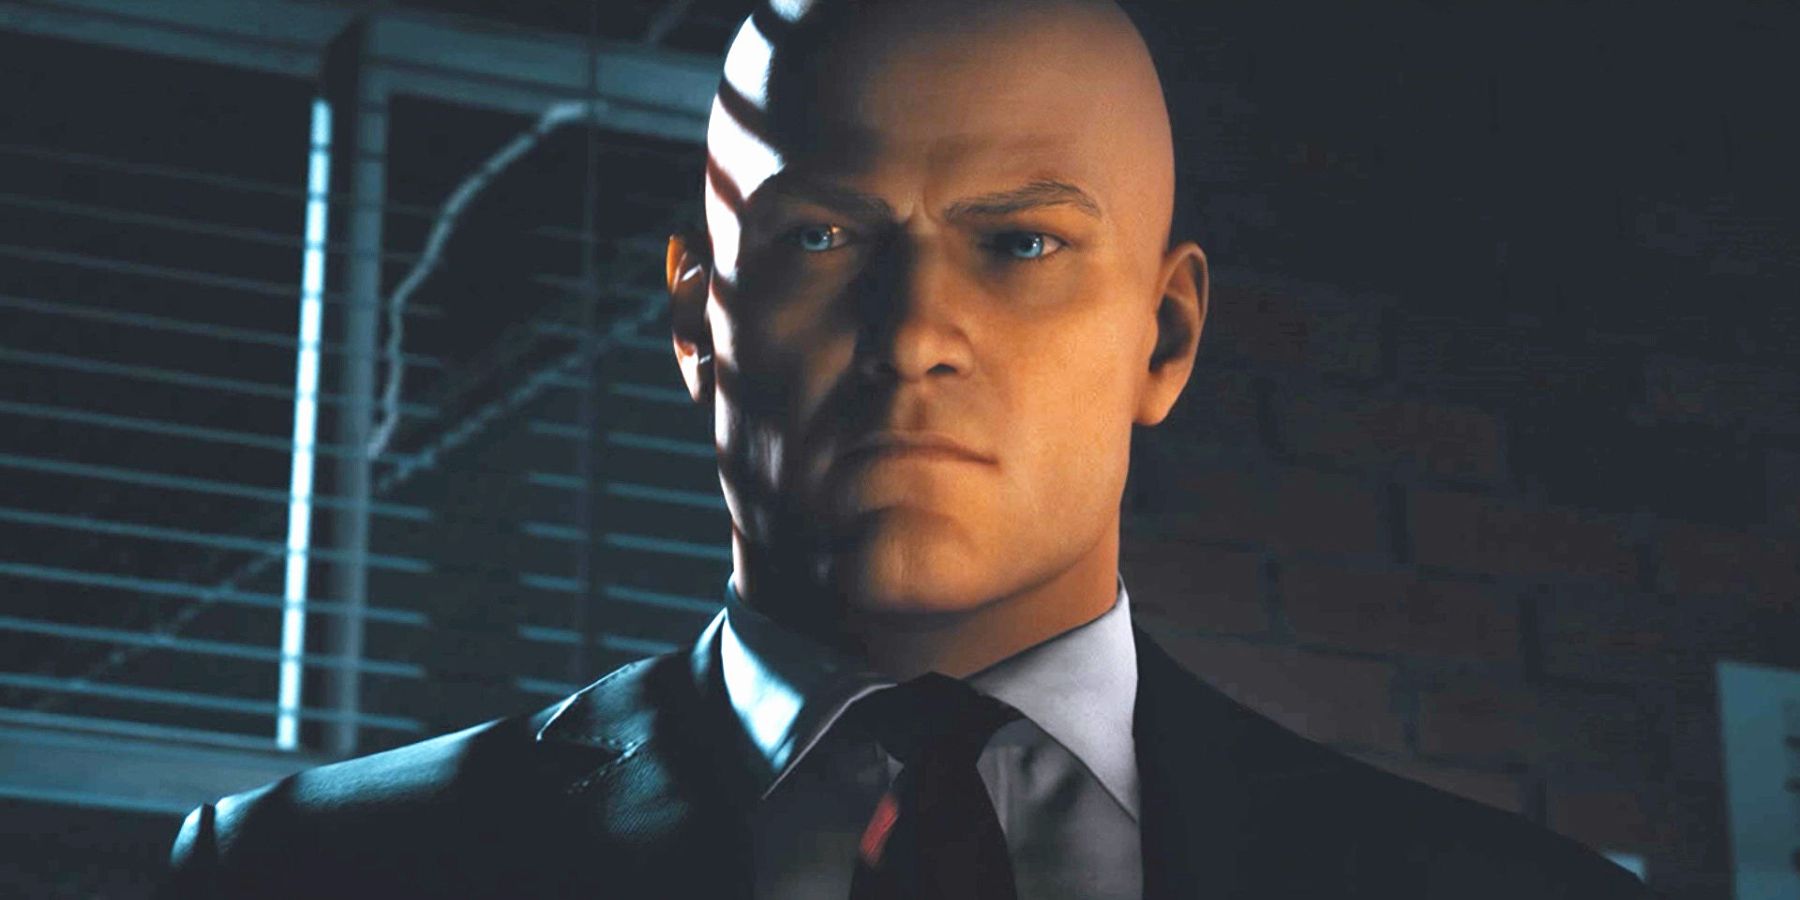 Image from Hitman 3 showing a close-up of Agent 47.